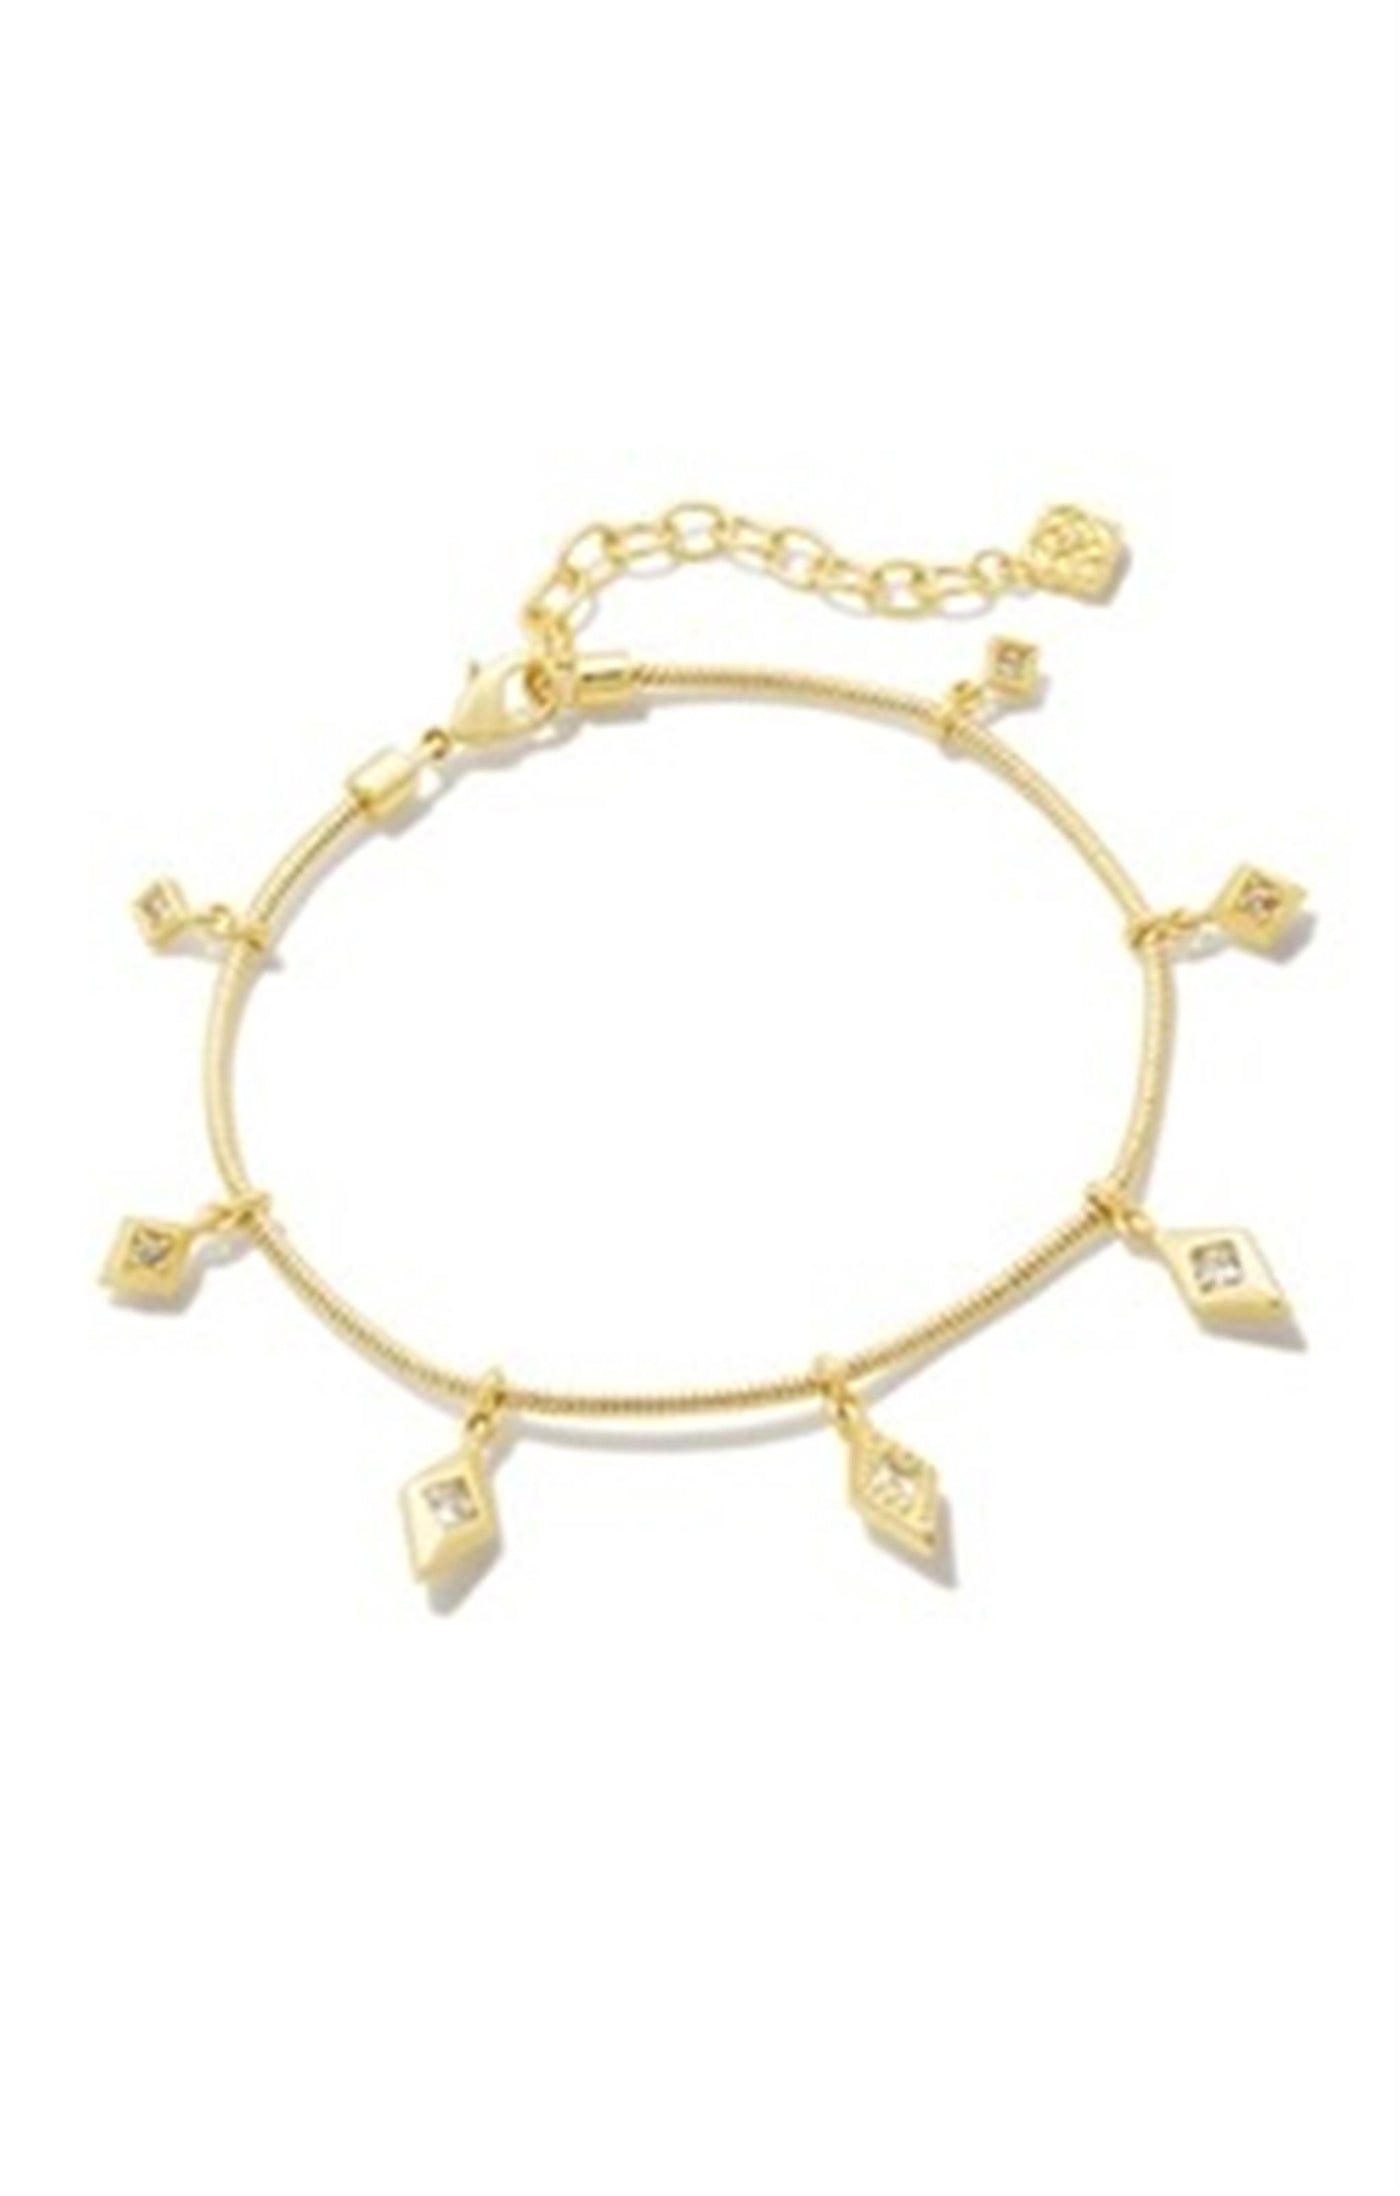 Gold Tone Bracelet Featuring White Crystal by Kendra Scott